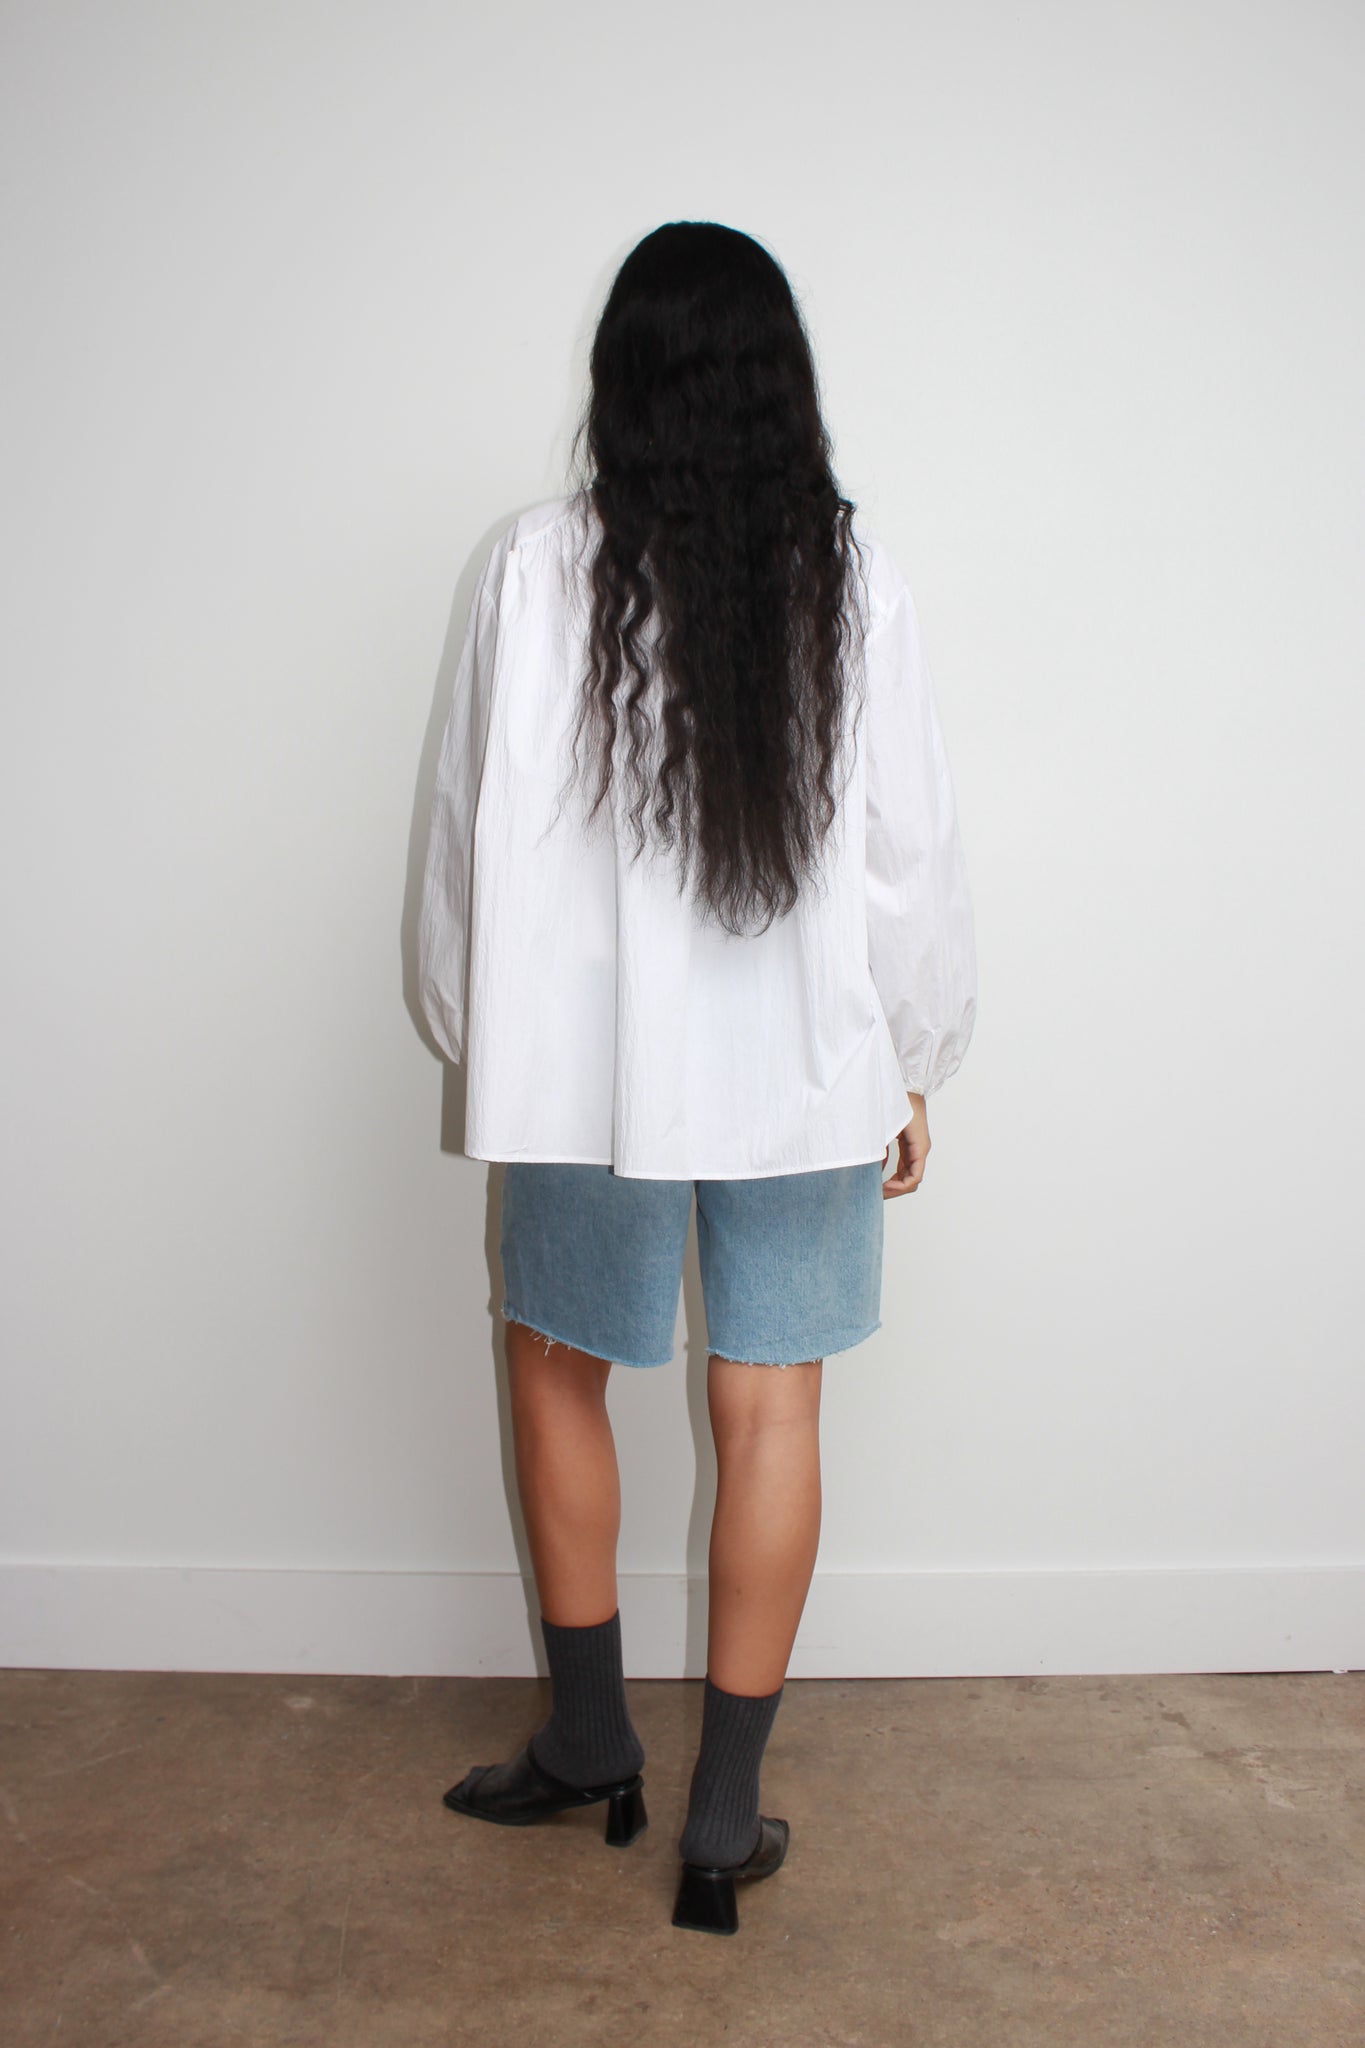 Oversized Shirring Top in White